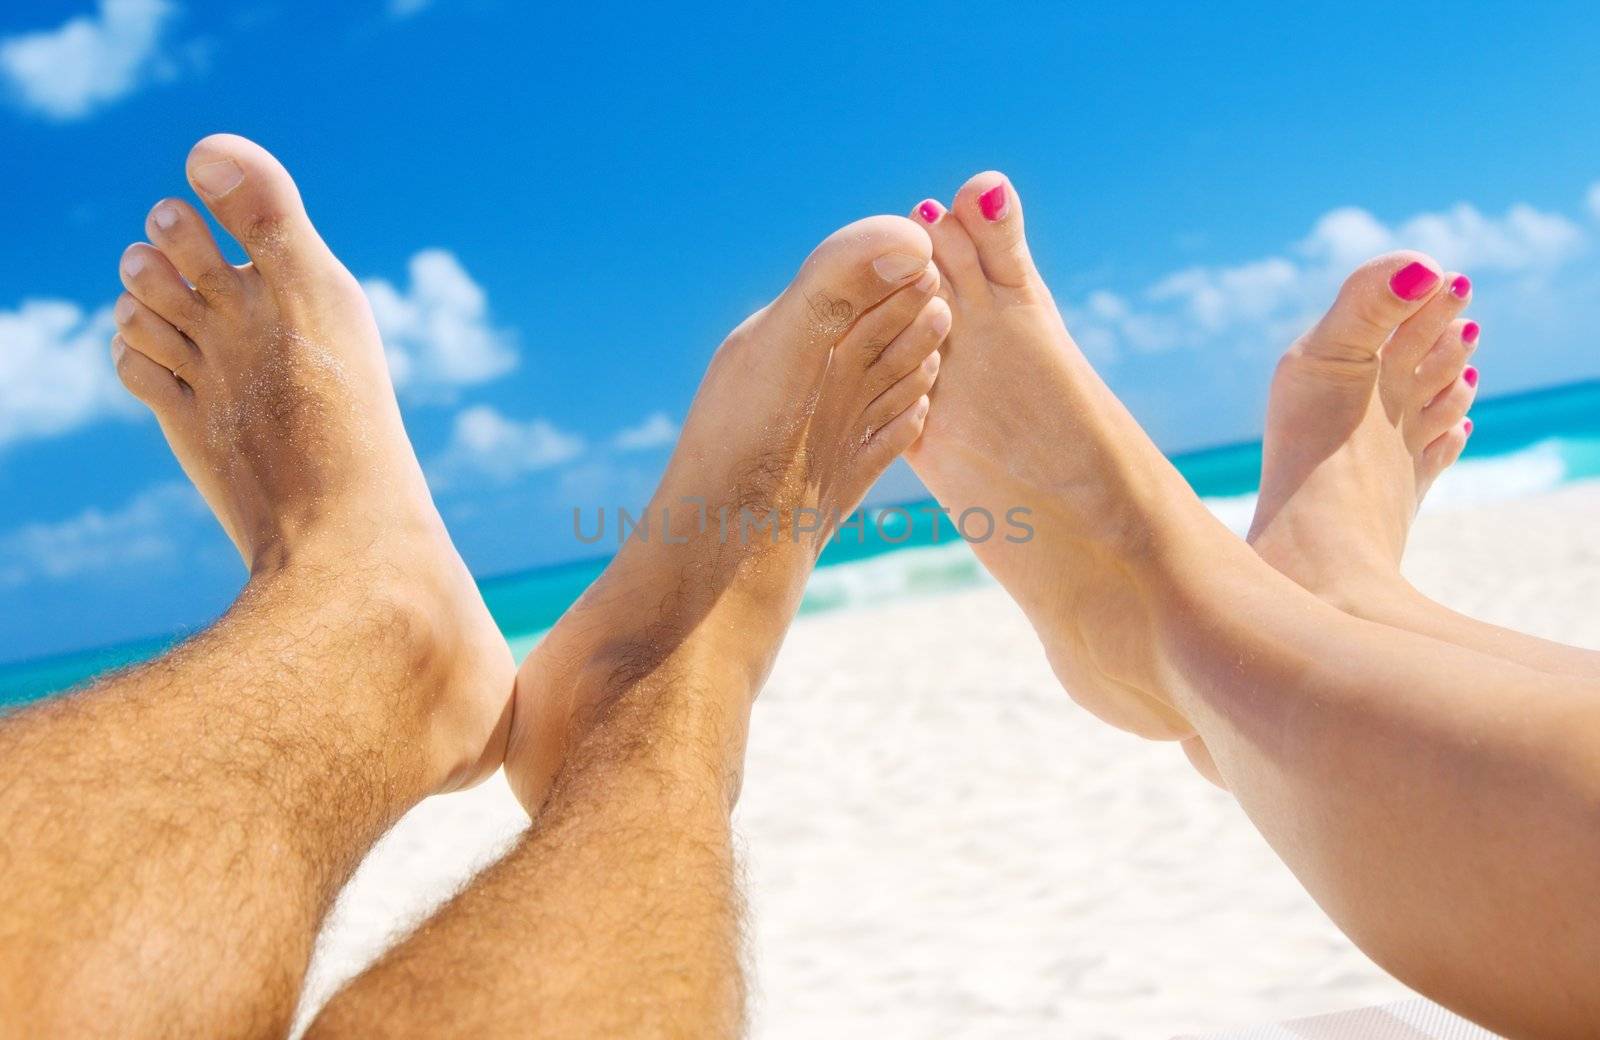 picture of male and female legs over tropical beach background